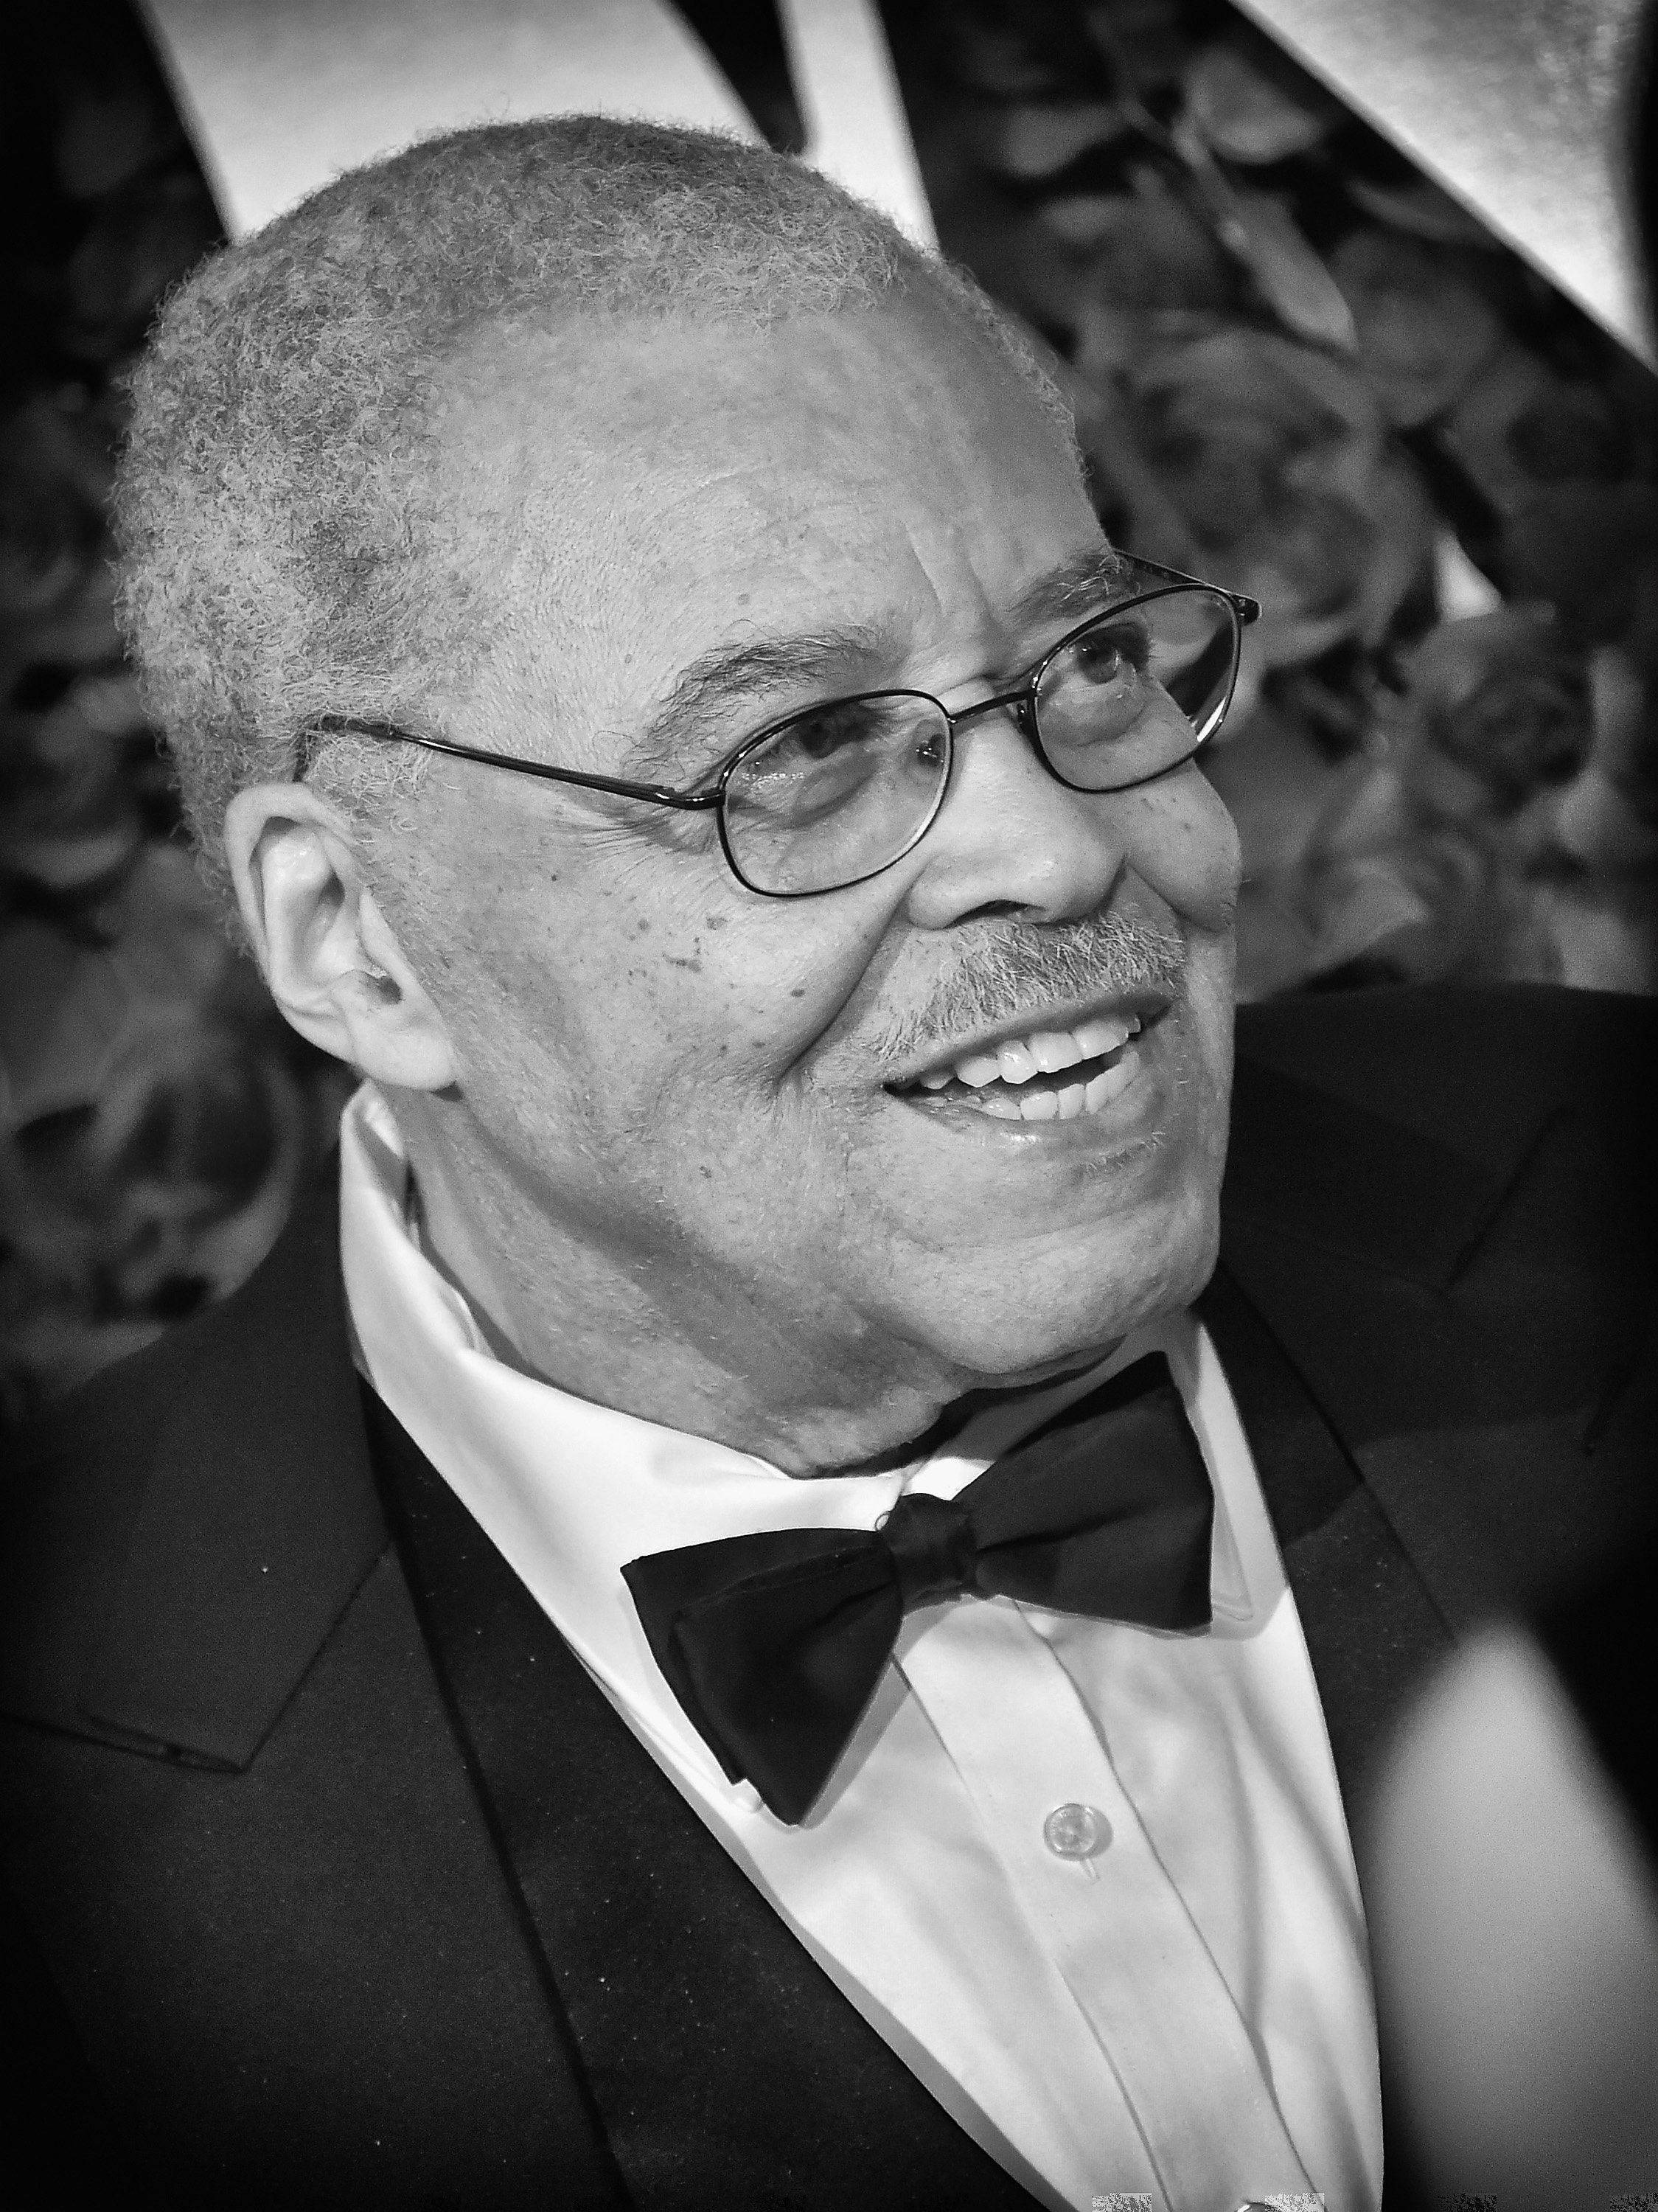 James Earl Jones at the 2016 Tony Awards in New York City on June 12, 2016. | Photo: Getty Images